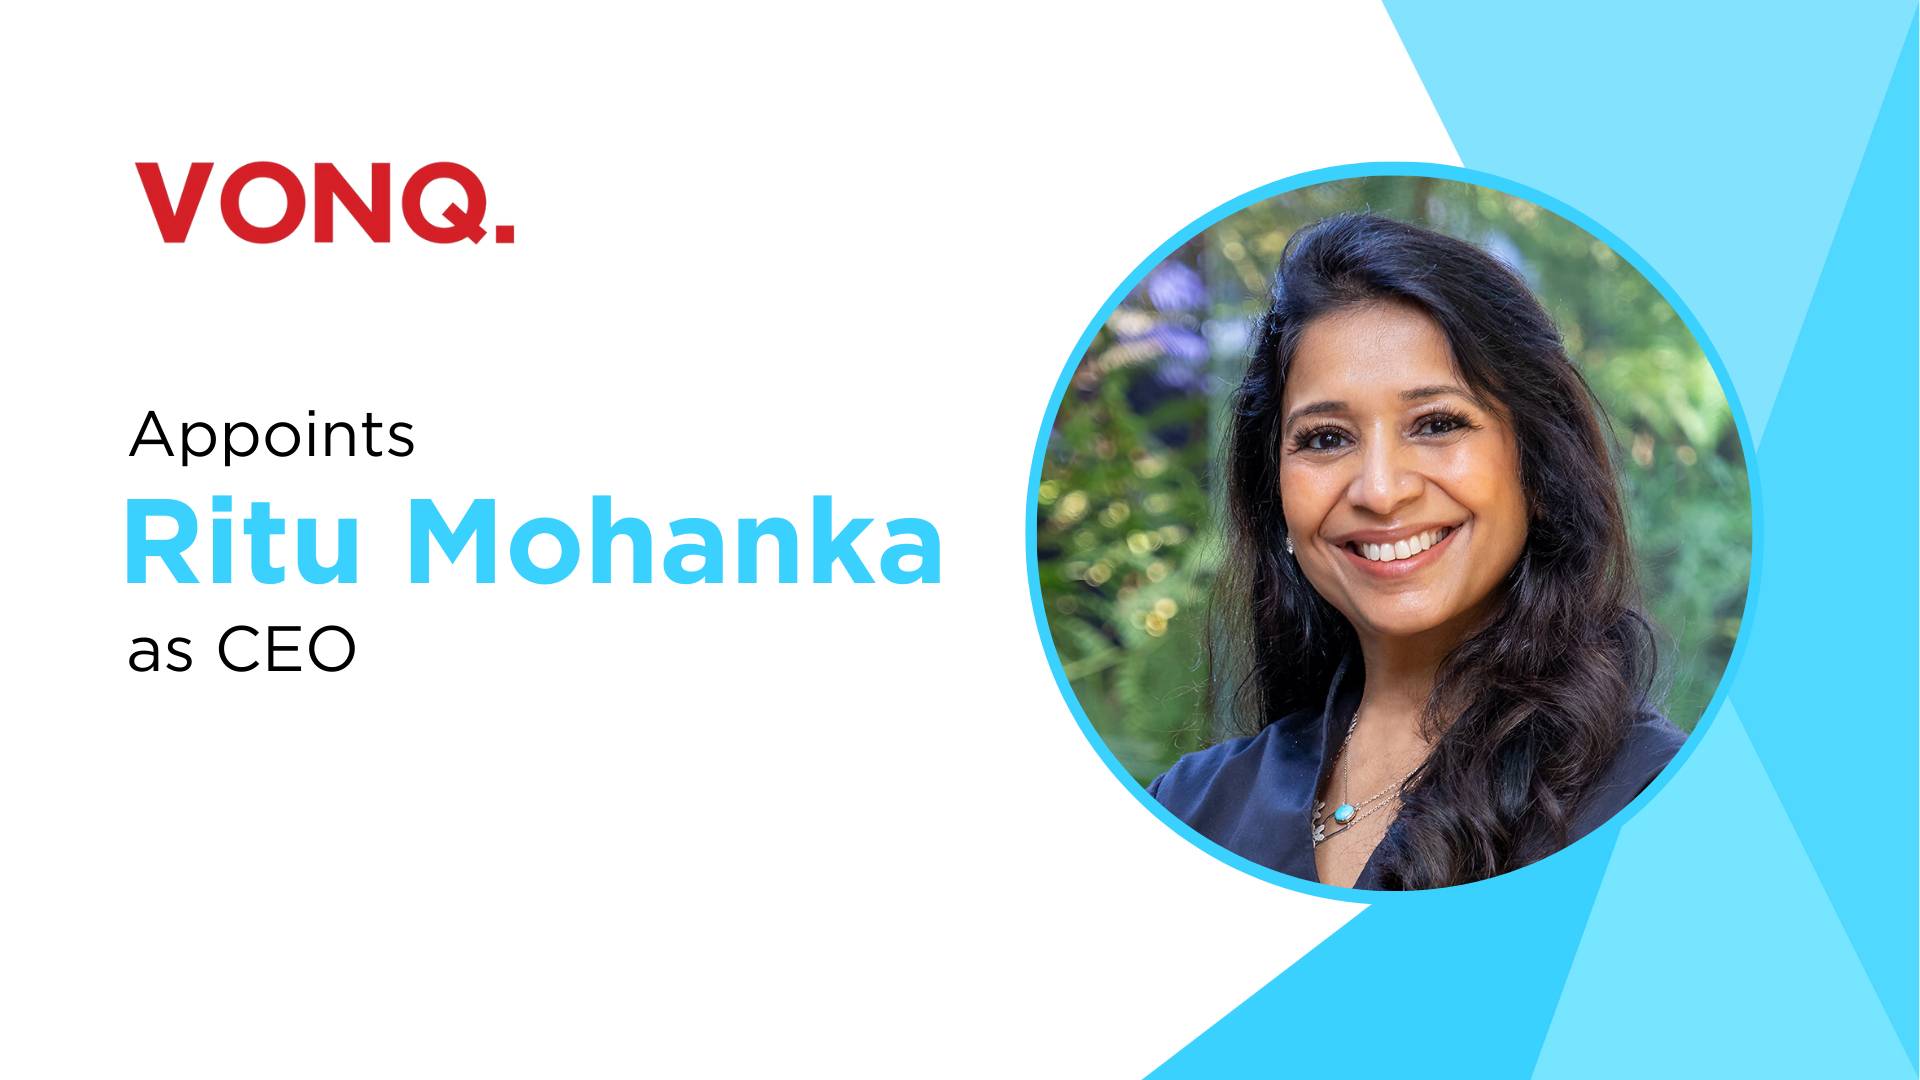 Ritu Mohanka Joins VONQ as CEO to Lead Global Expansion in HR Tech